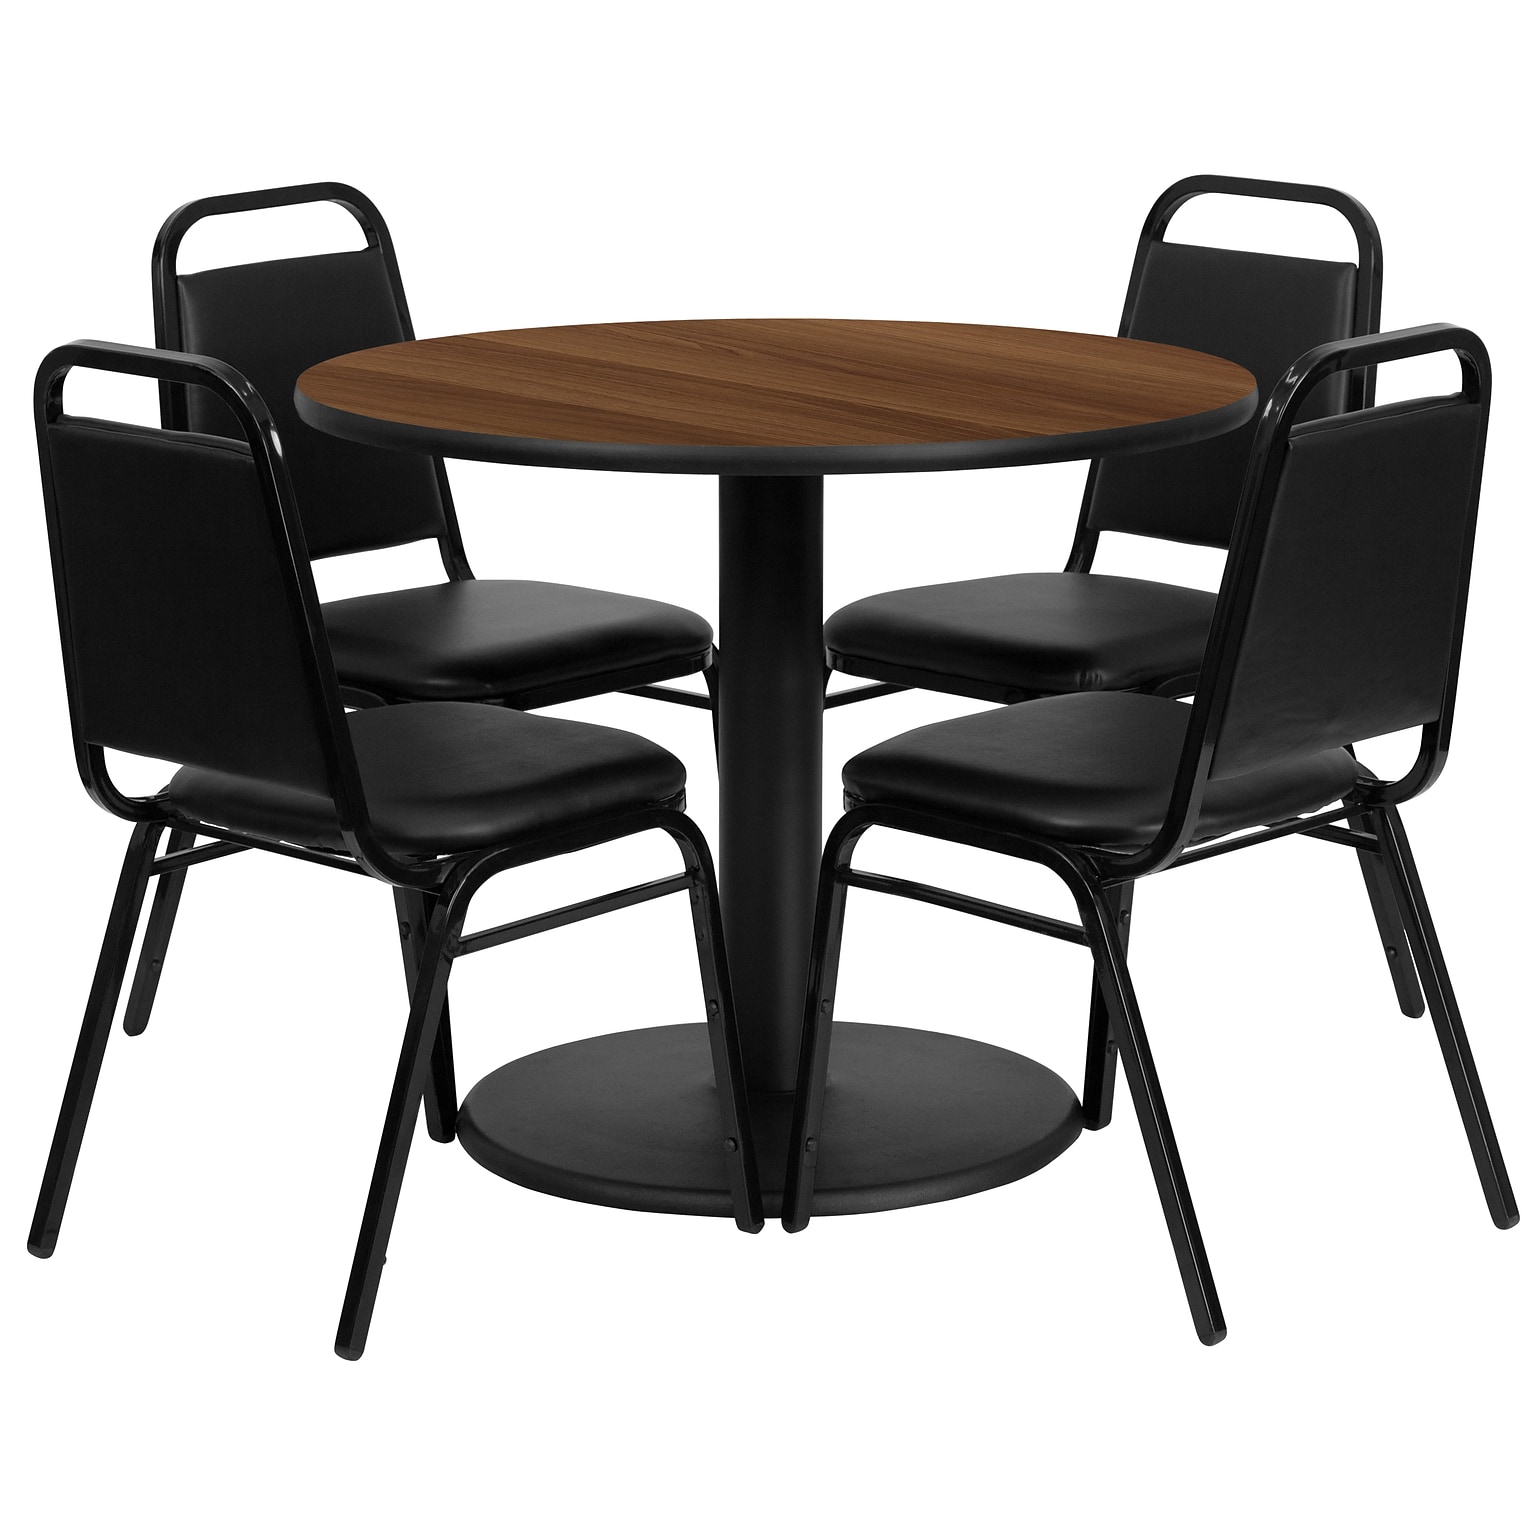 Flash Furniture 36 Round Walnut Laminate Table Set with Round Base and 4 Black Trapezoidal Back Banquet Chairs (RSRB1004)